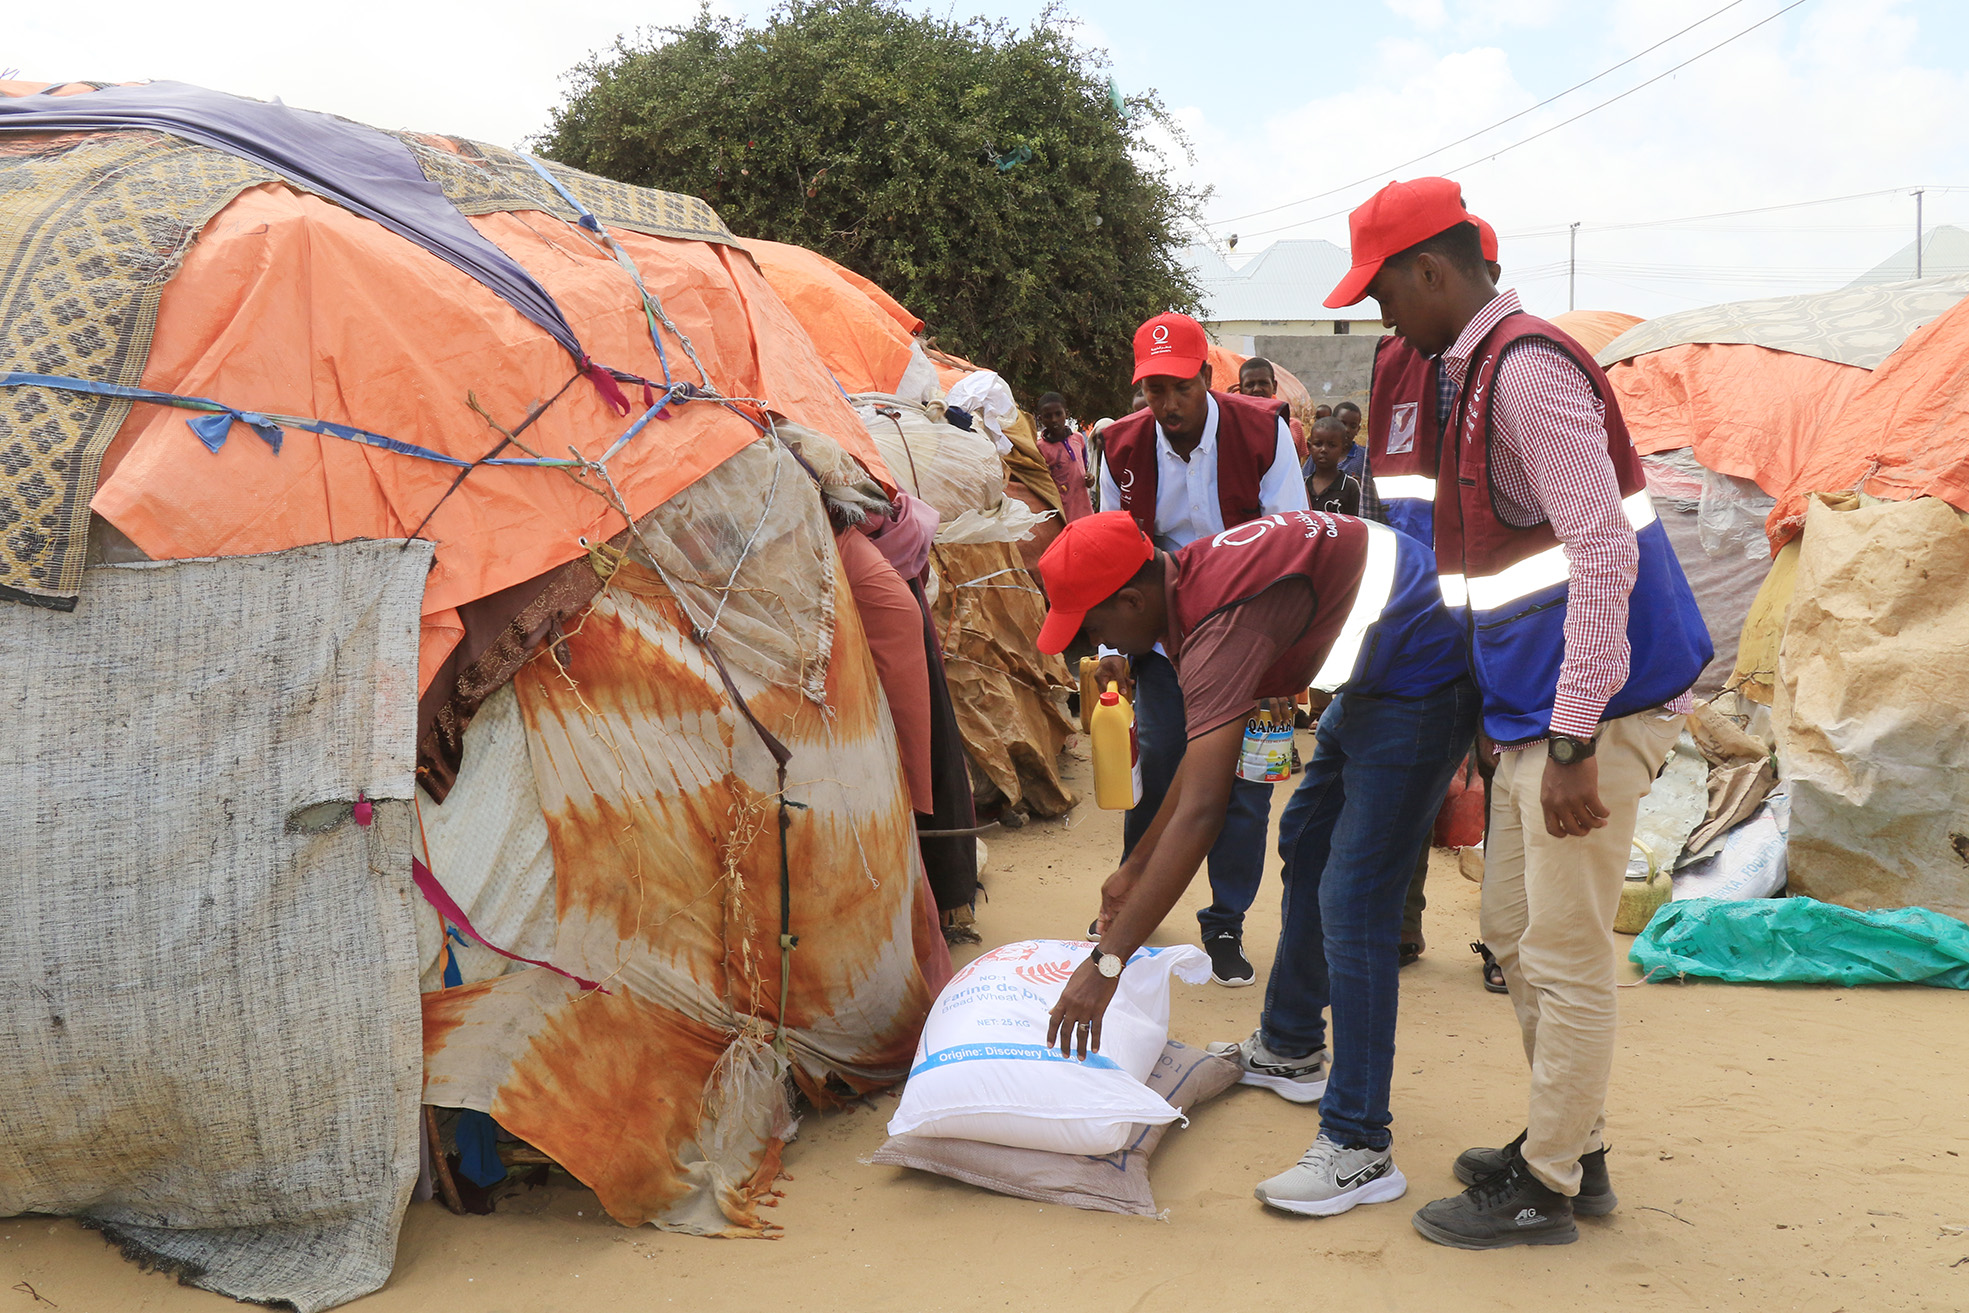 Qatar Charity Delivers Food Aid to IDPs in Somalia